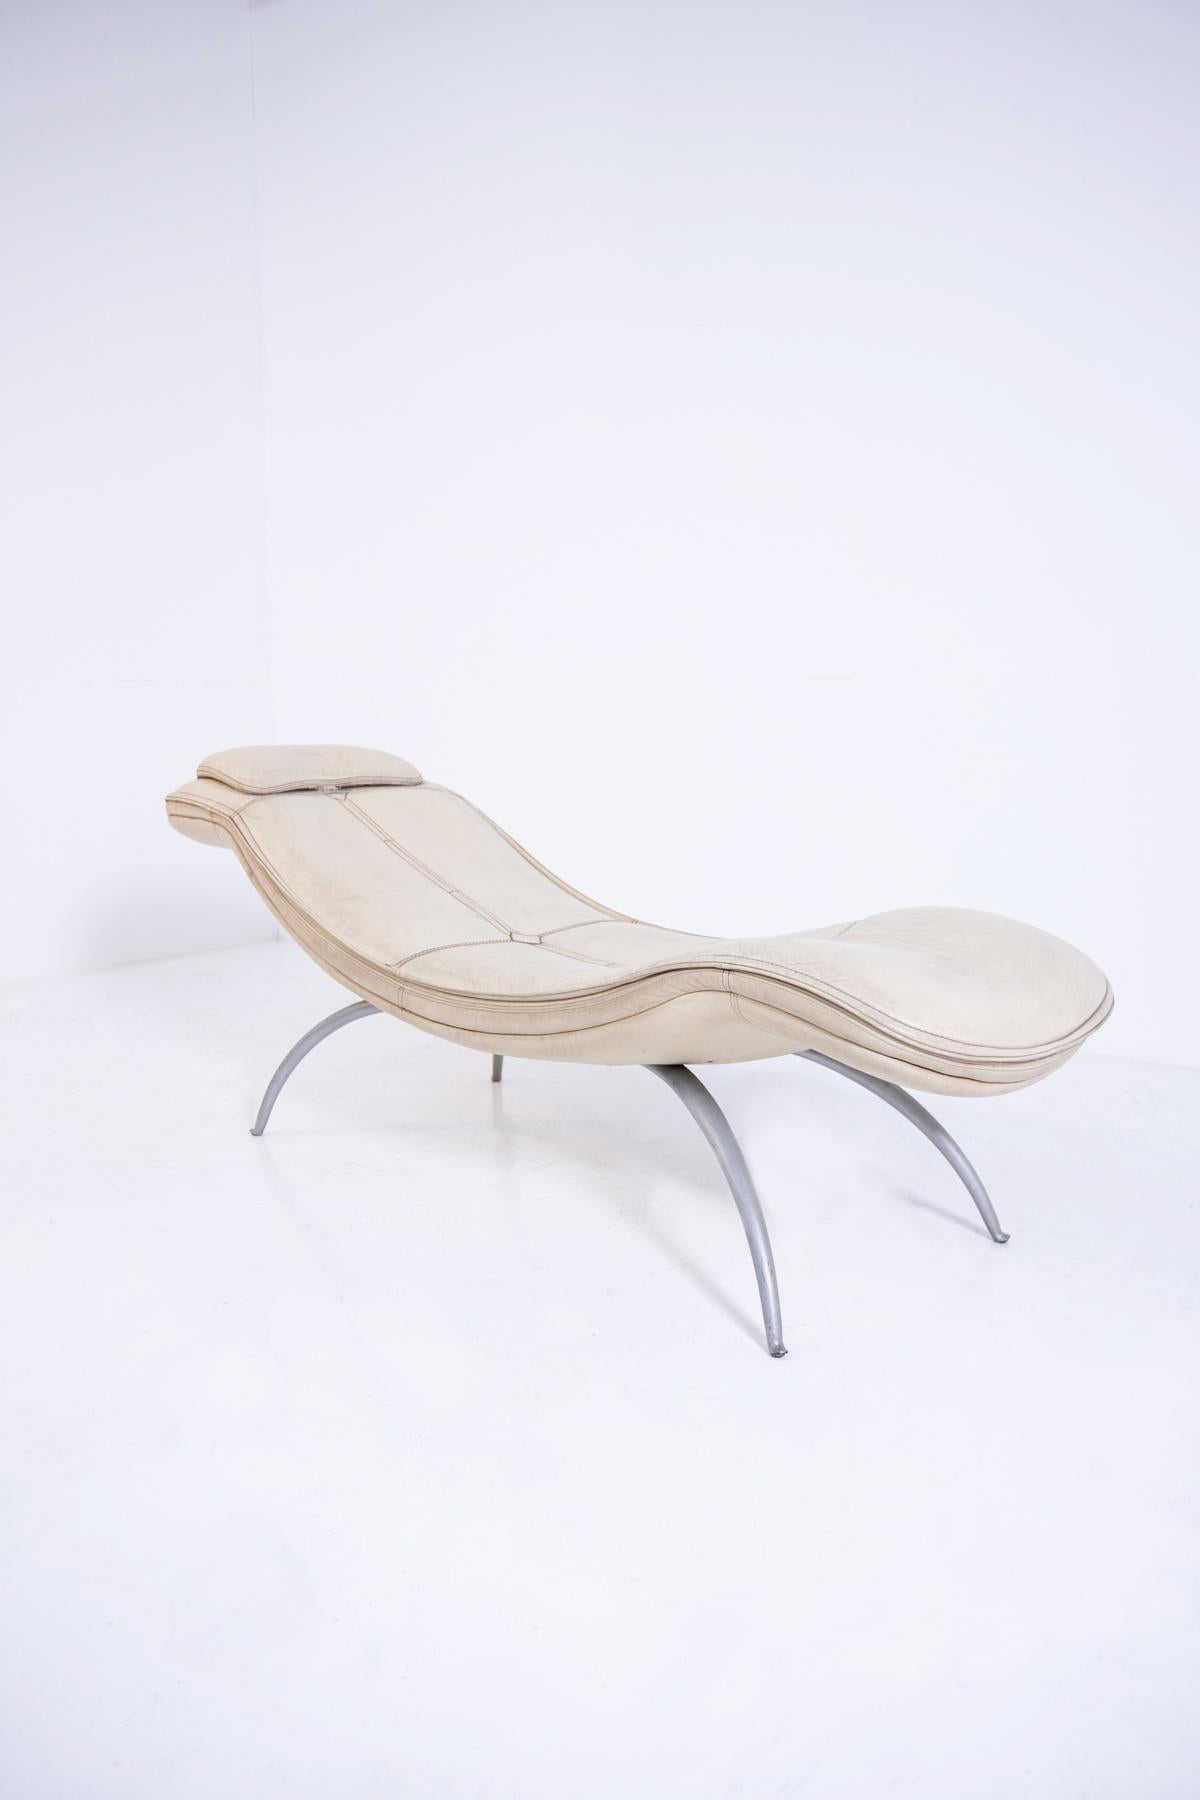 Late 20th Century Chaise Longue in Leather Prod. by Moroso, 1970s